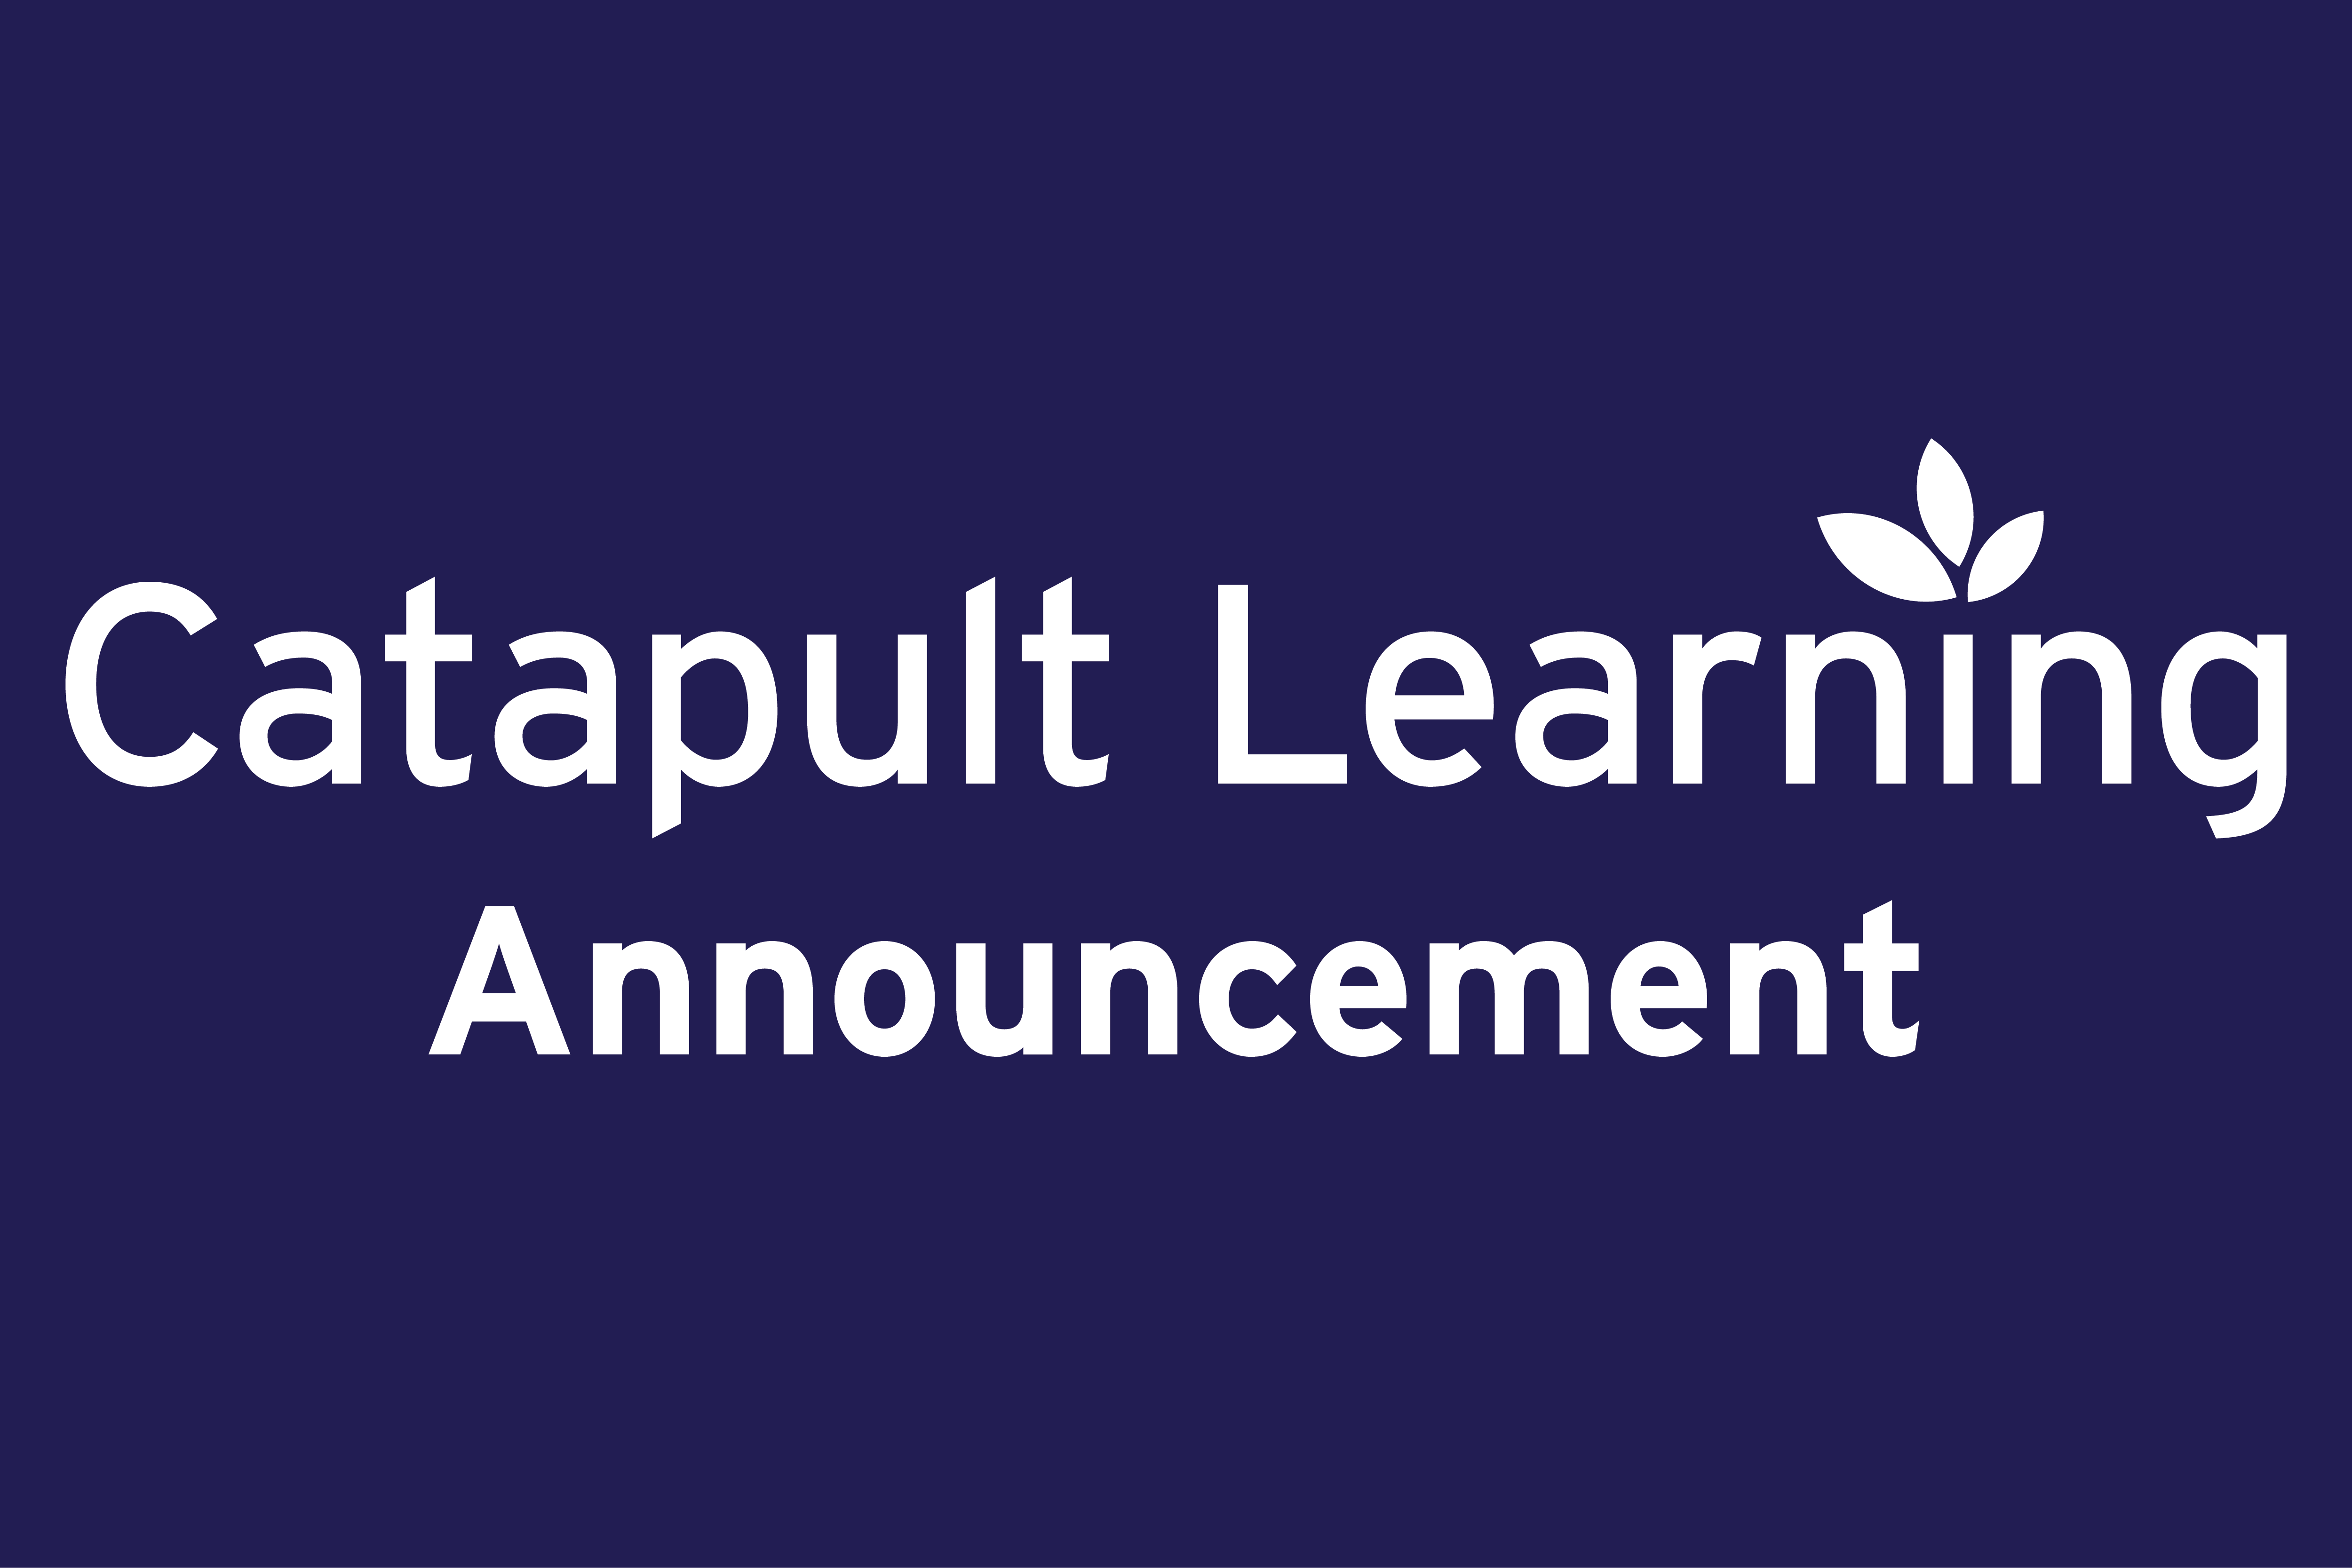 Catapult Learning Announcement